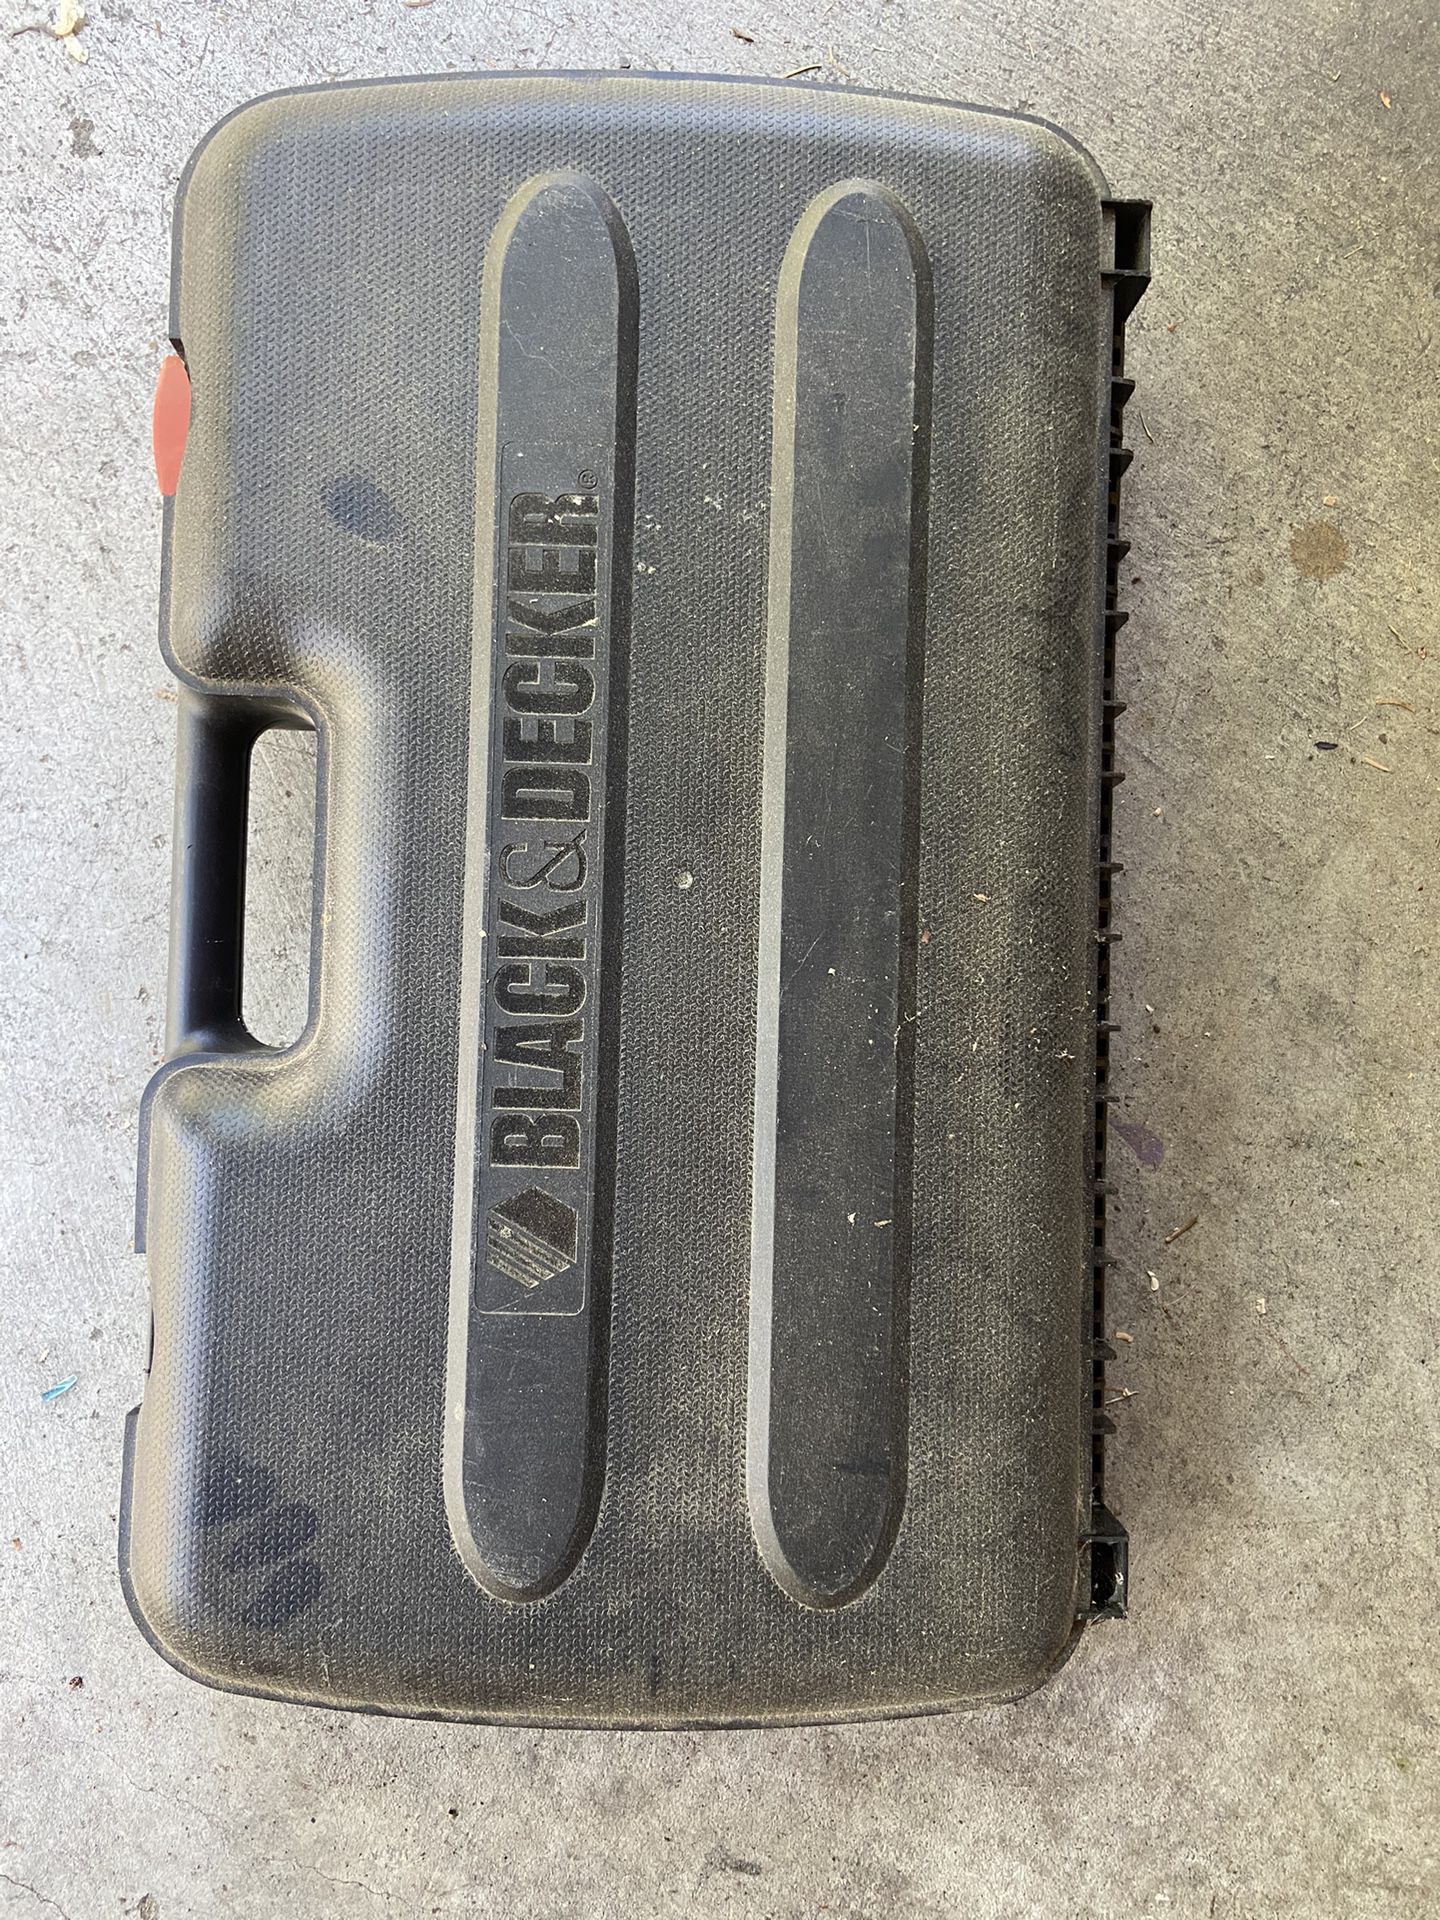 Black & Decker 12 V Finish Nailer for Sale in Lakewood, WA - OfferUp